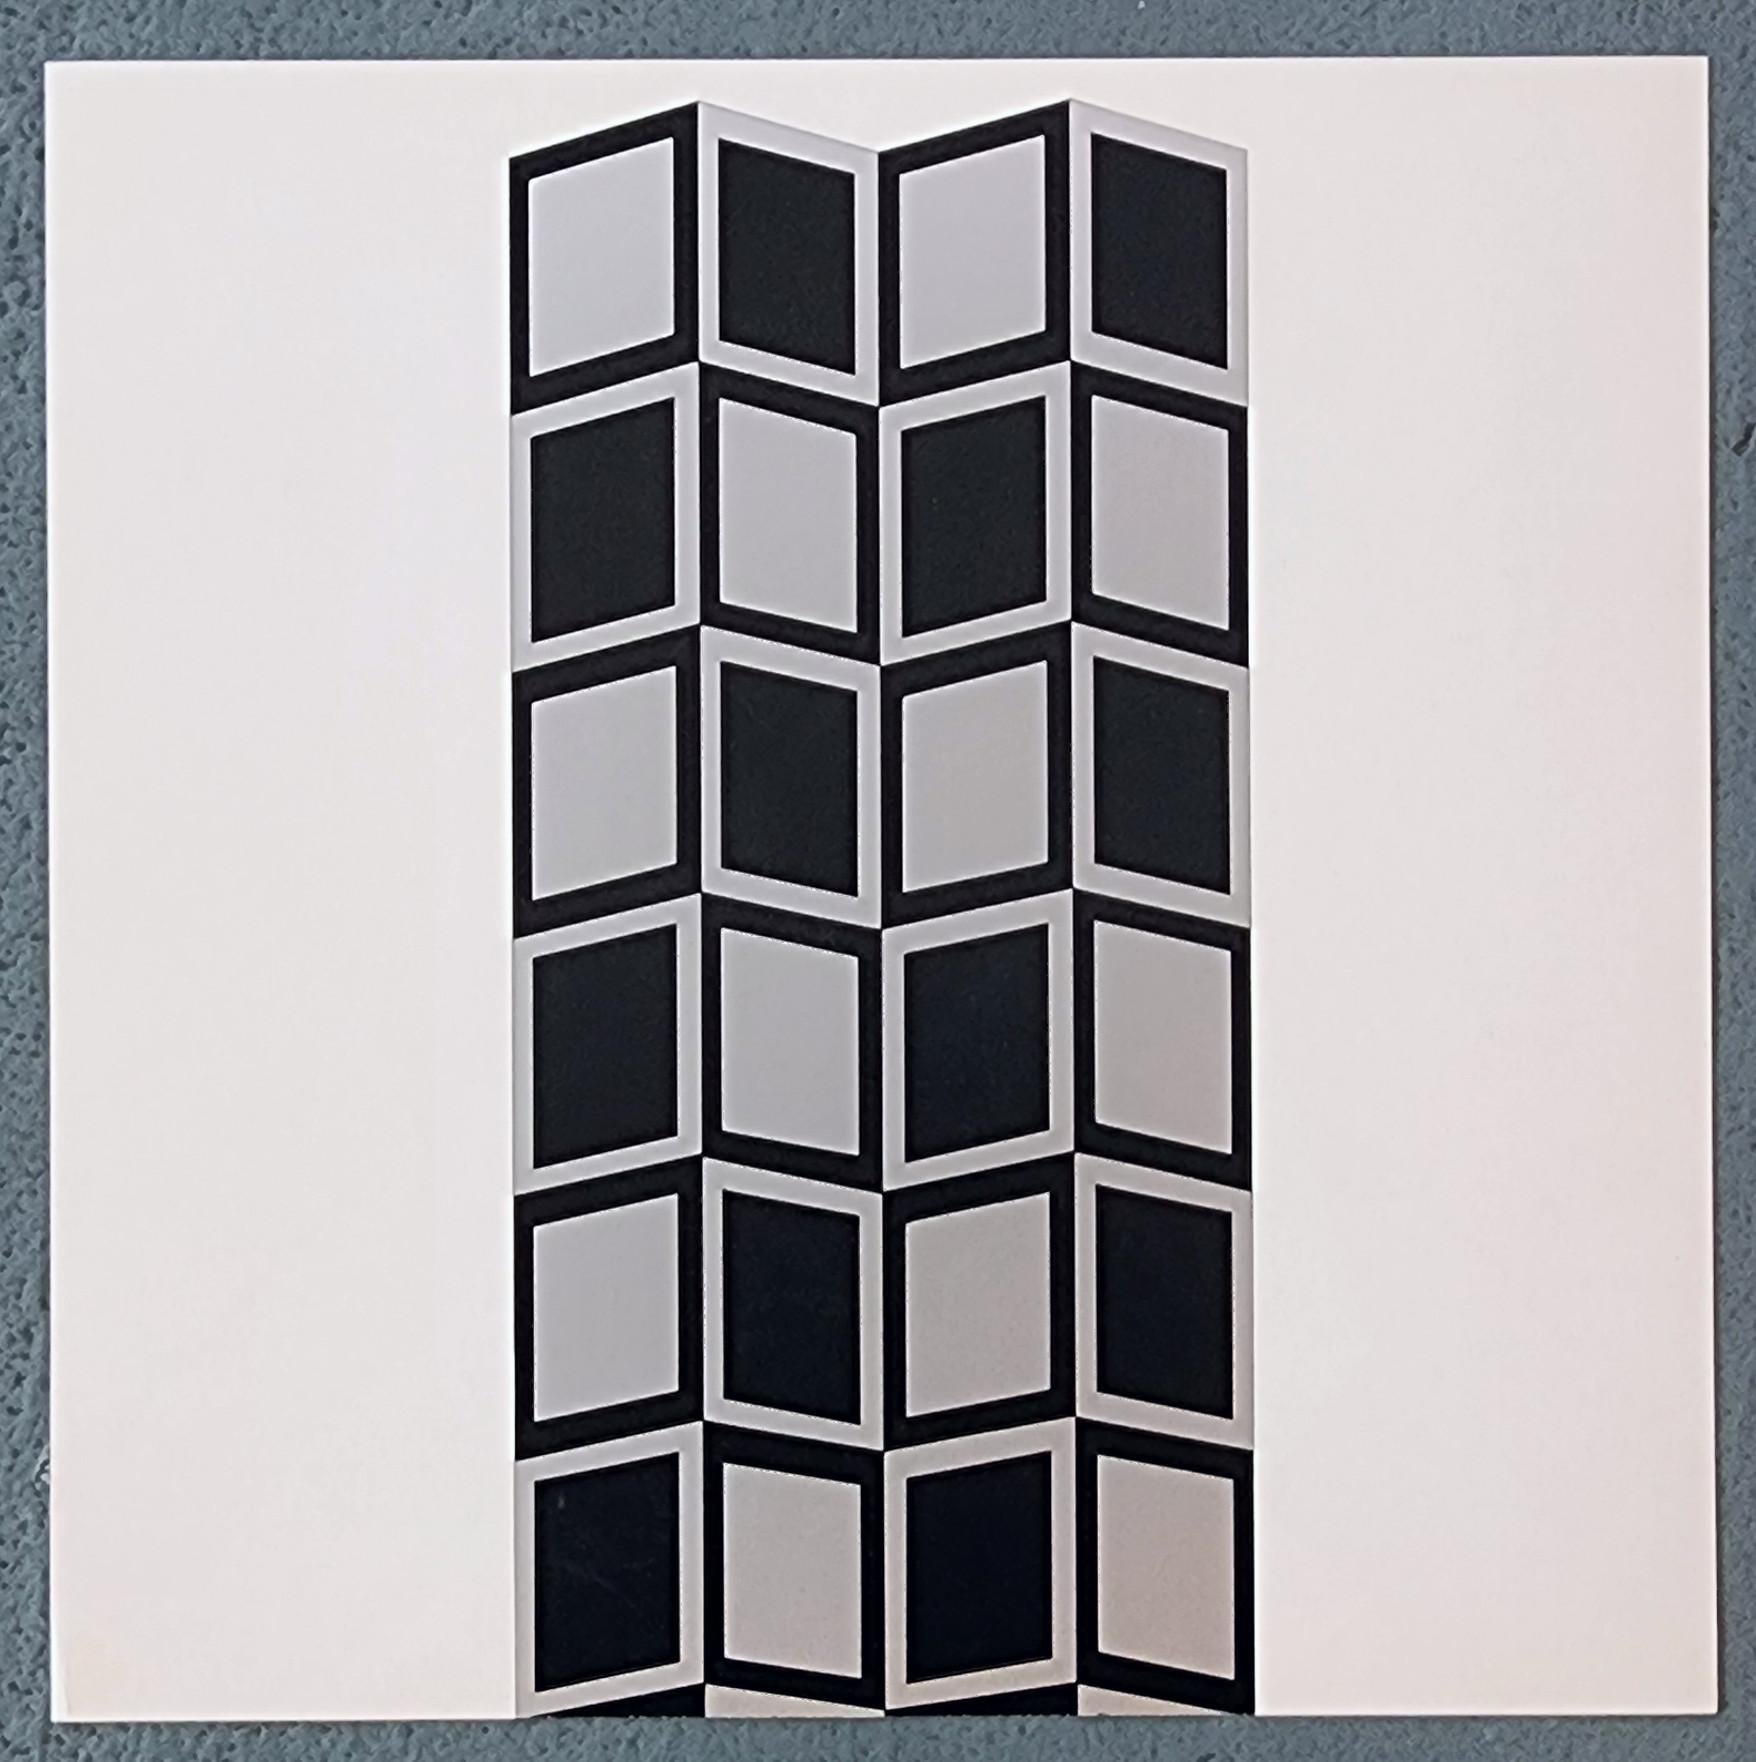 Saeule HK (Detail), 1967 (~36% OFF LIMITED TIME ONLY) - Op Art Print by Victor Vasarely